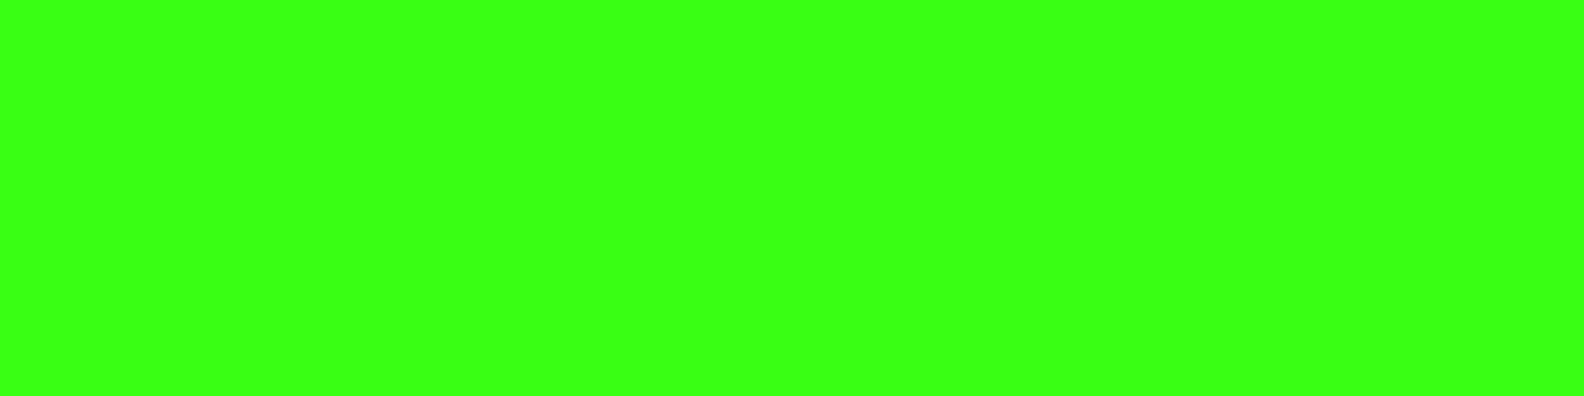 1584x396 Neon Green Solid Color Background